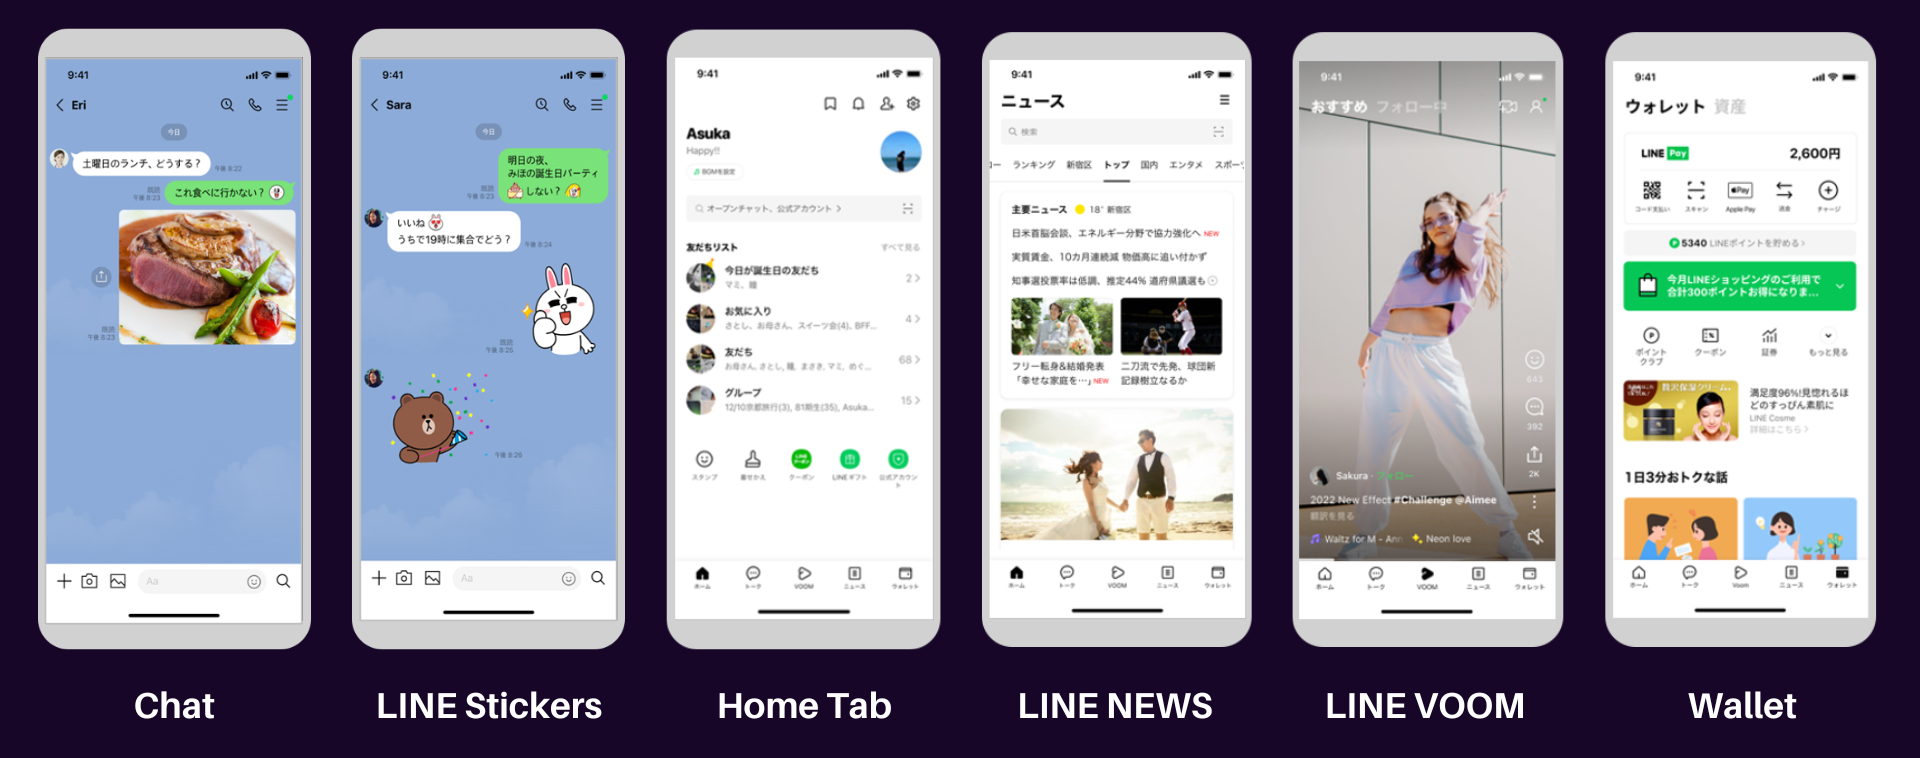 Example of LINE app features